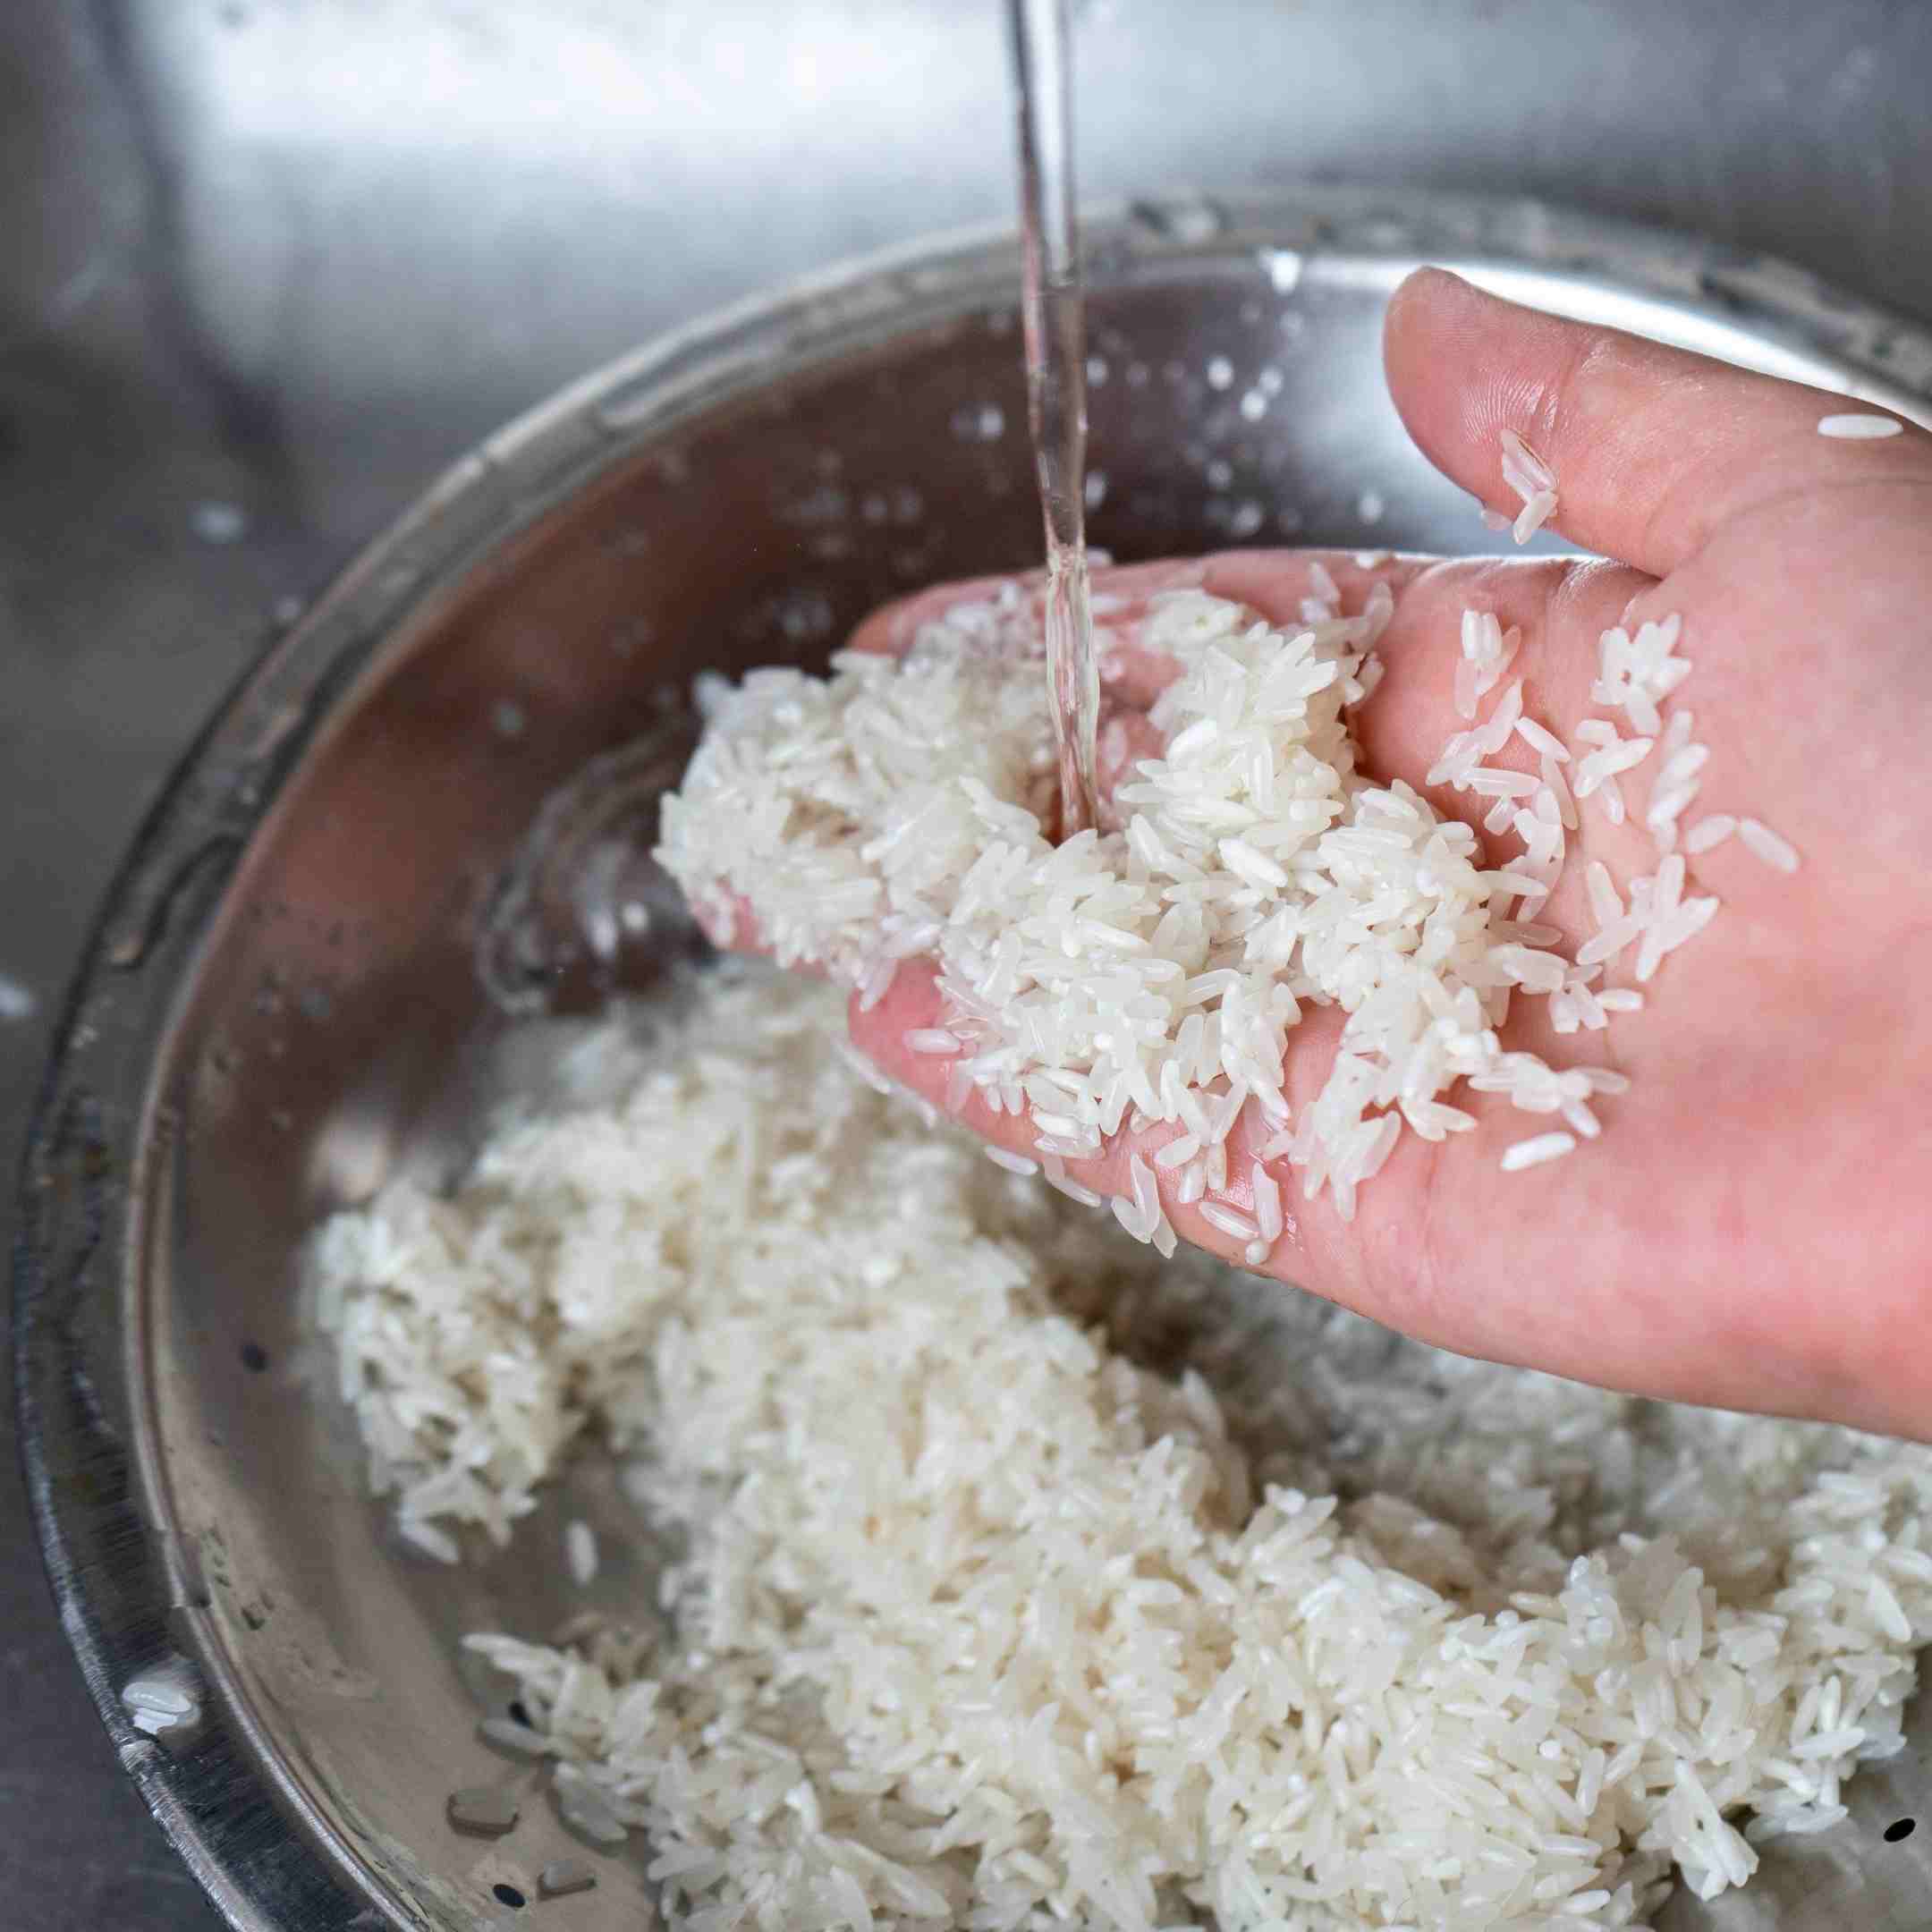 rinsing rice in a fine-mesh strainer under cold running water before cooking